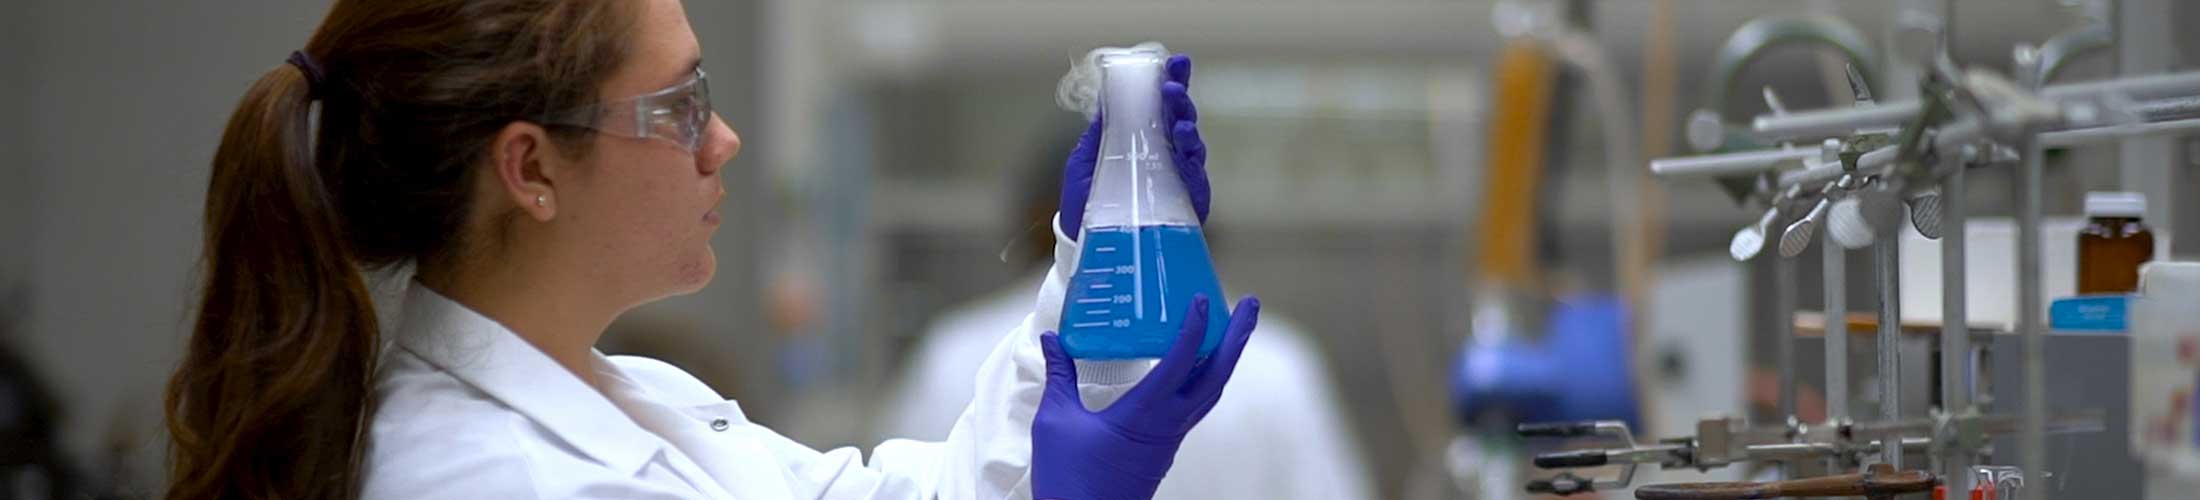 Female student holding a beaker in lab.